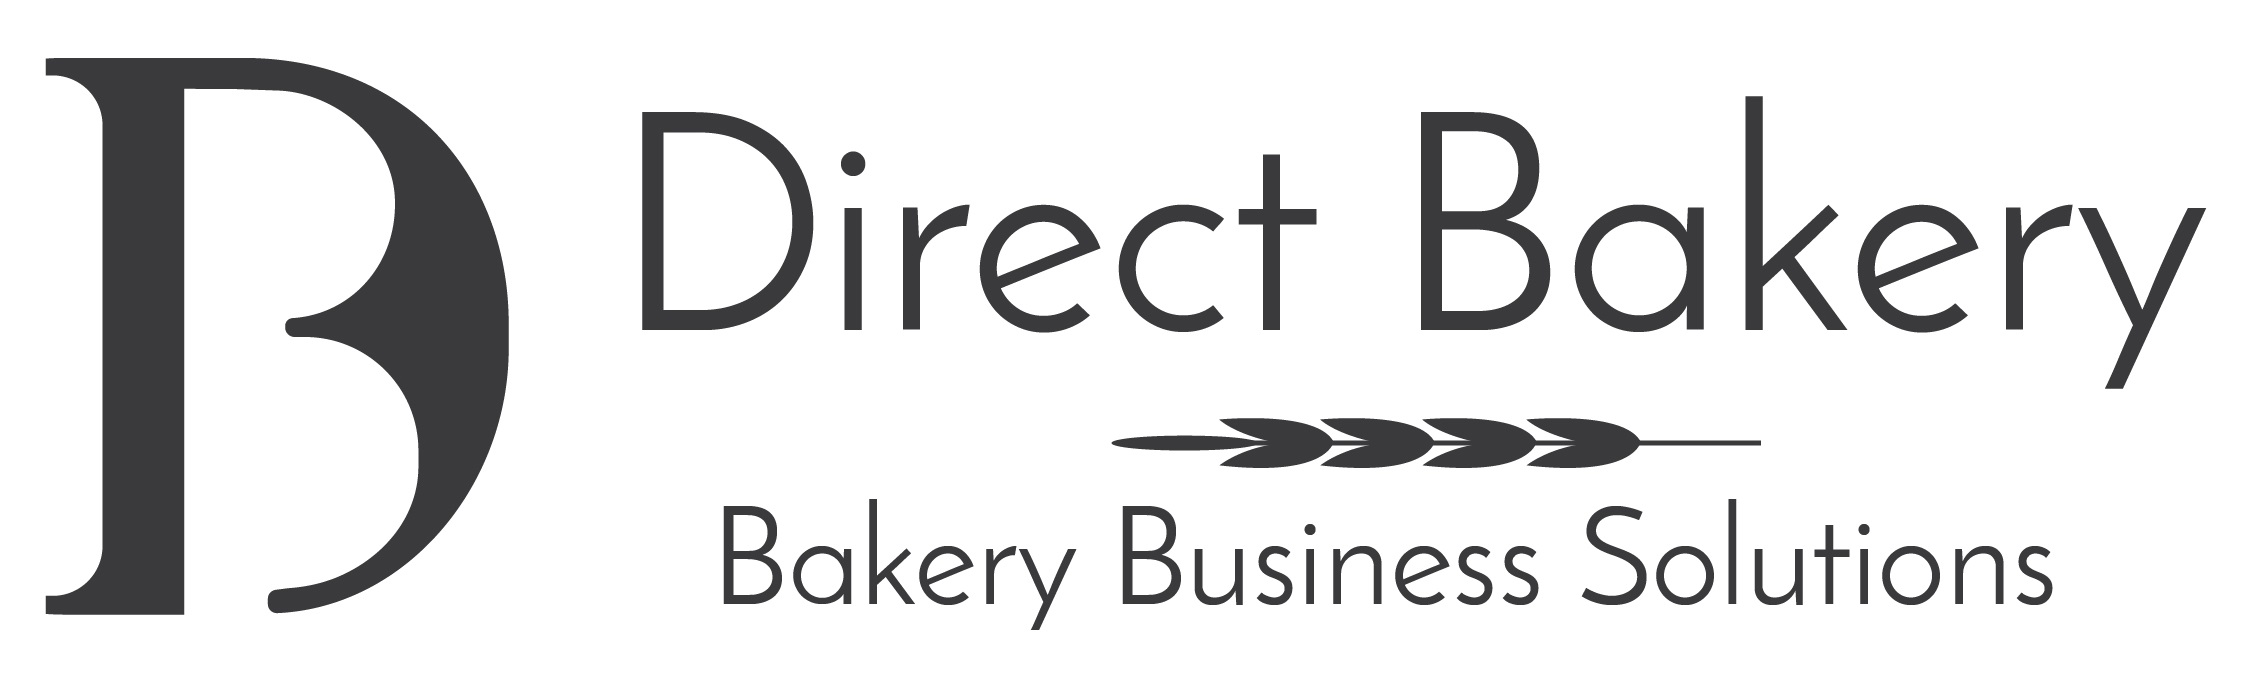 Direct Bakery bakeware baking equipment and supplies